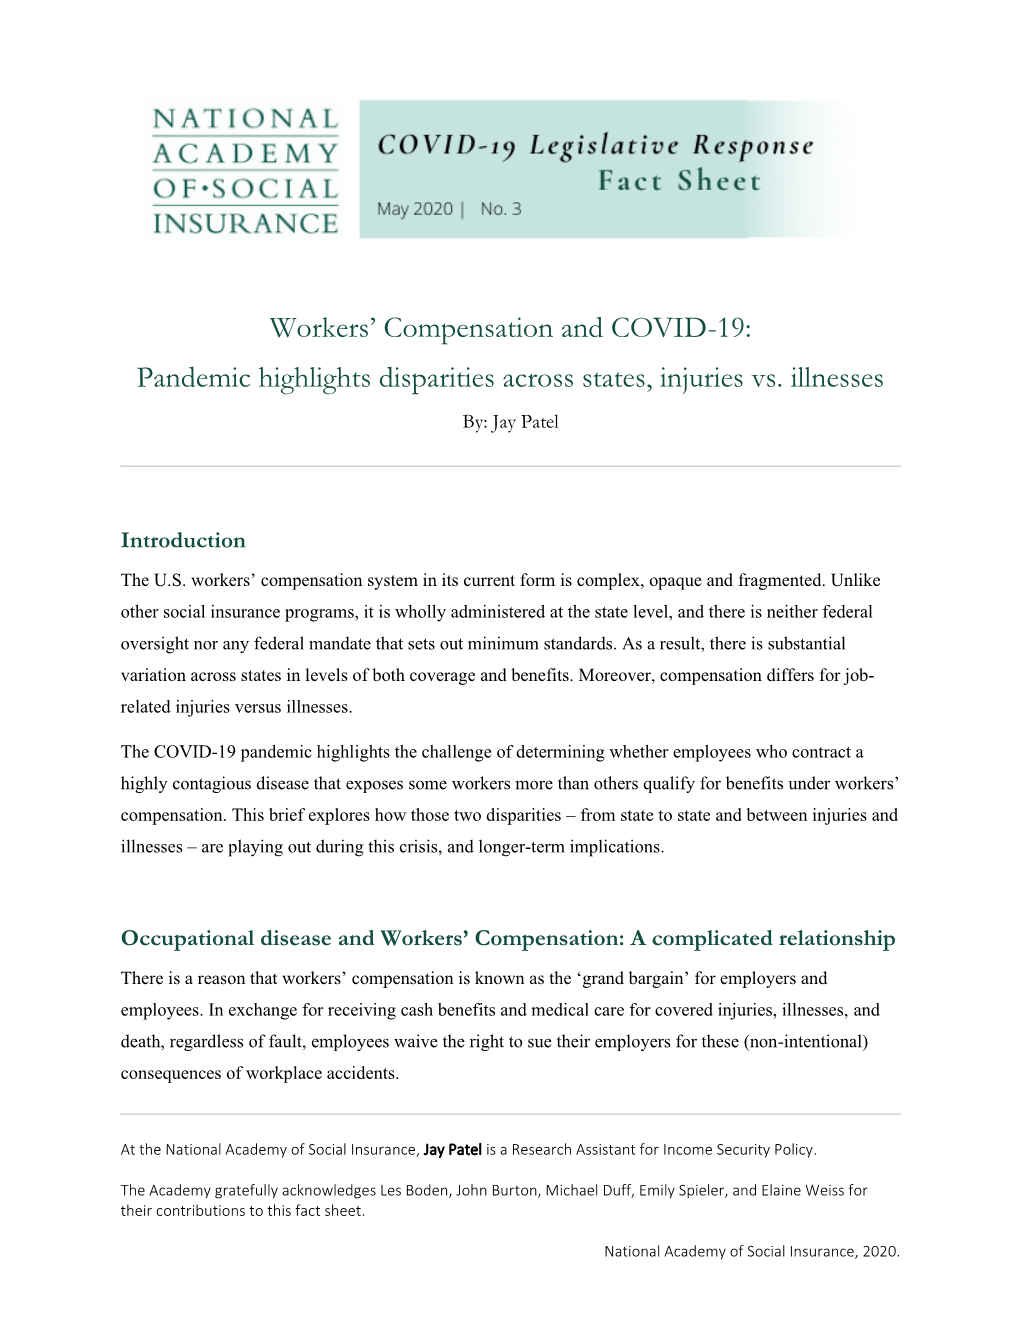 Workers' Compensation and COVID-19